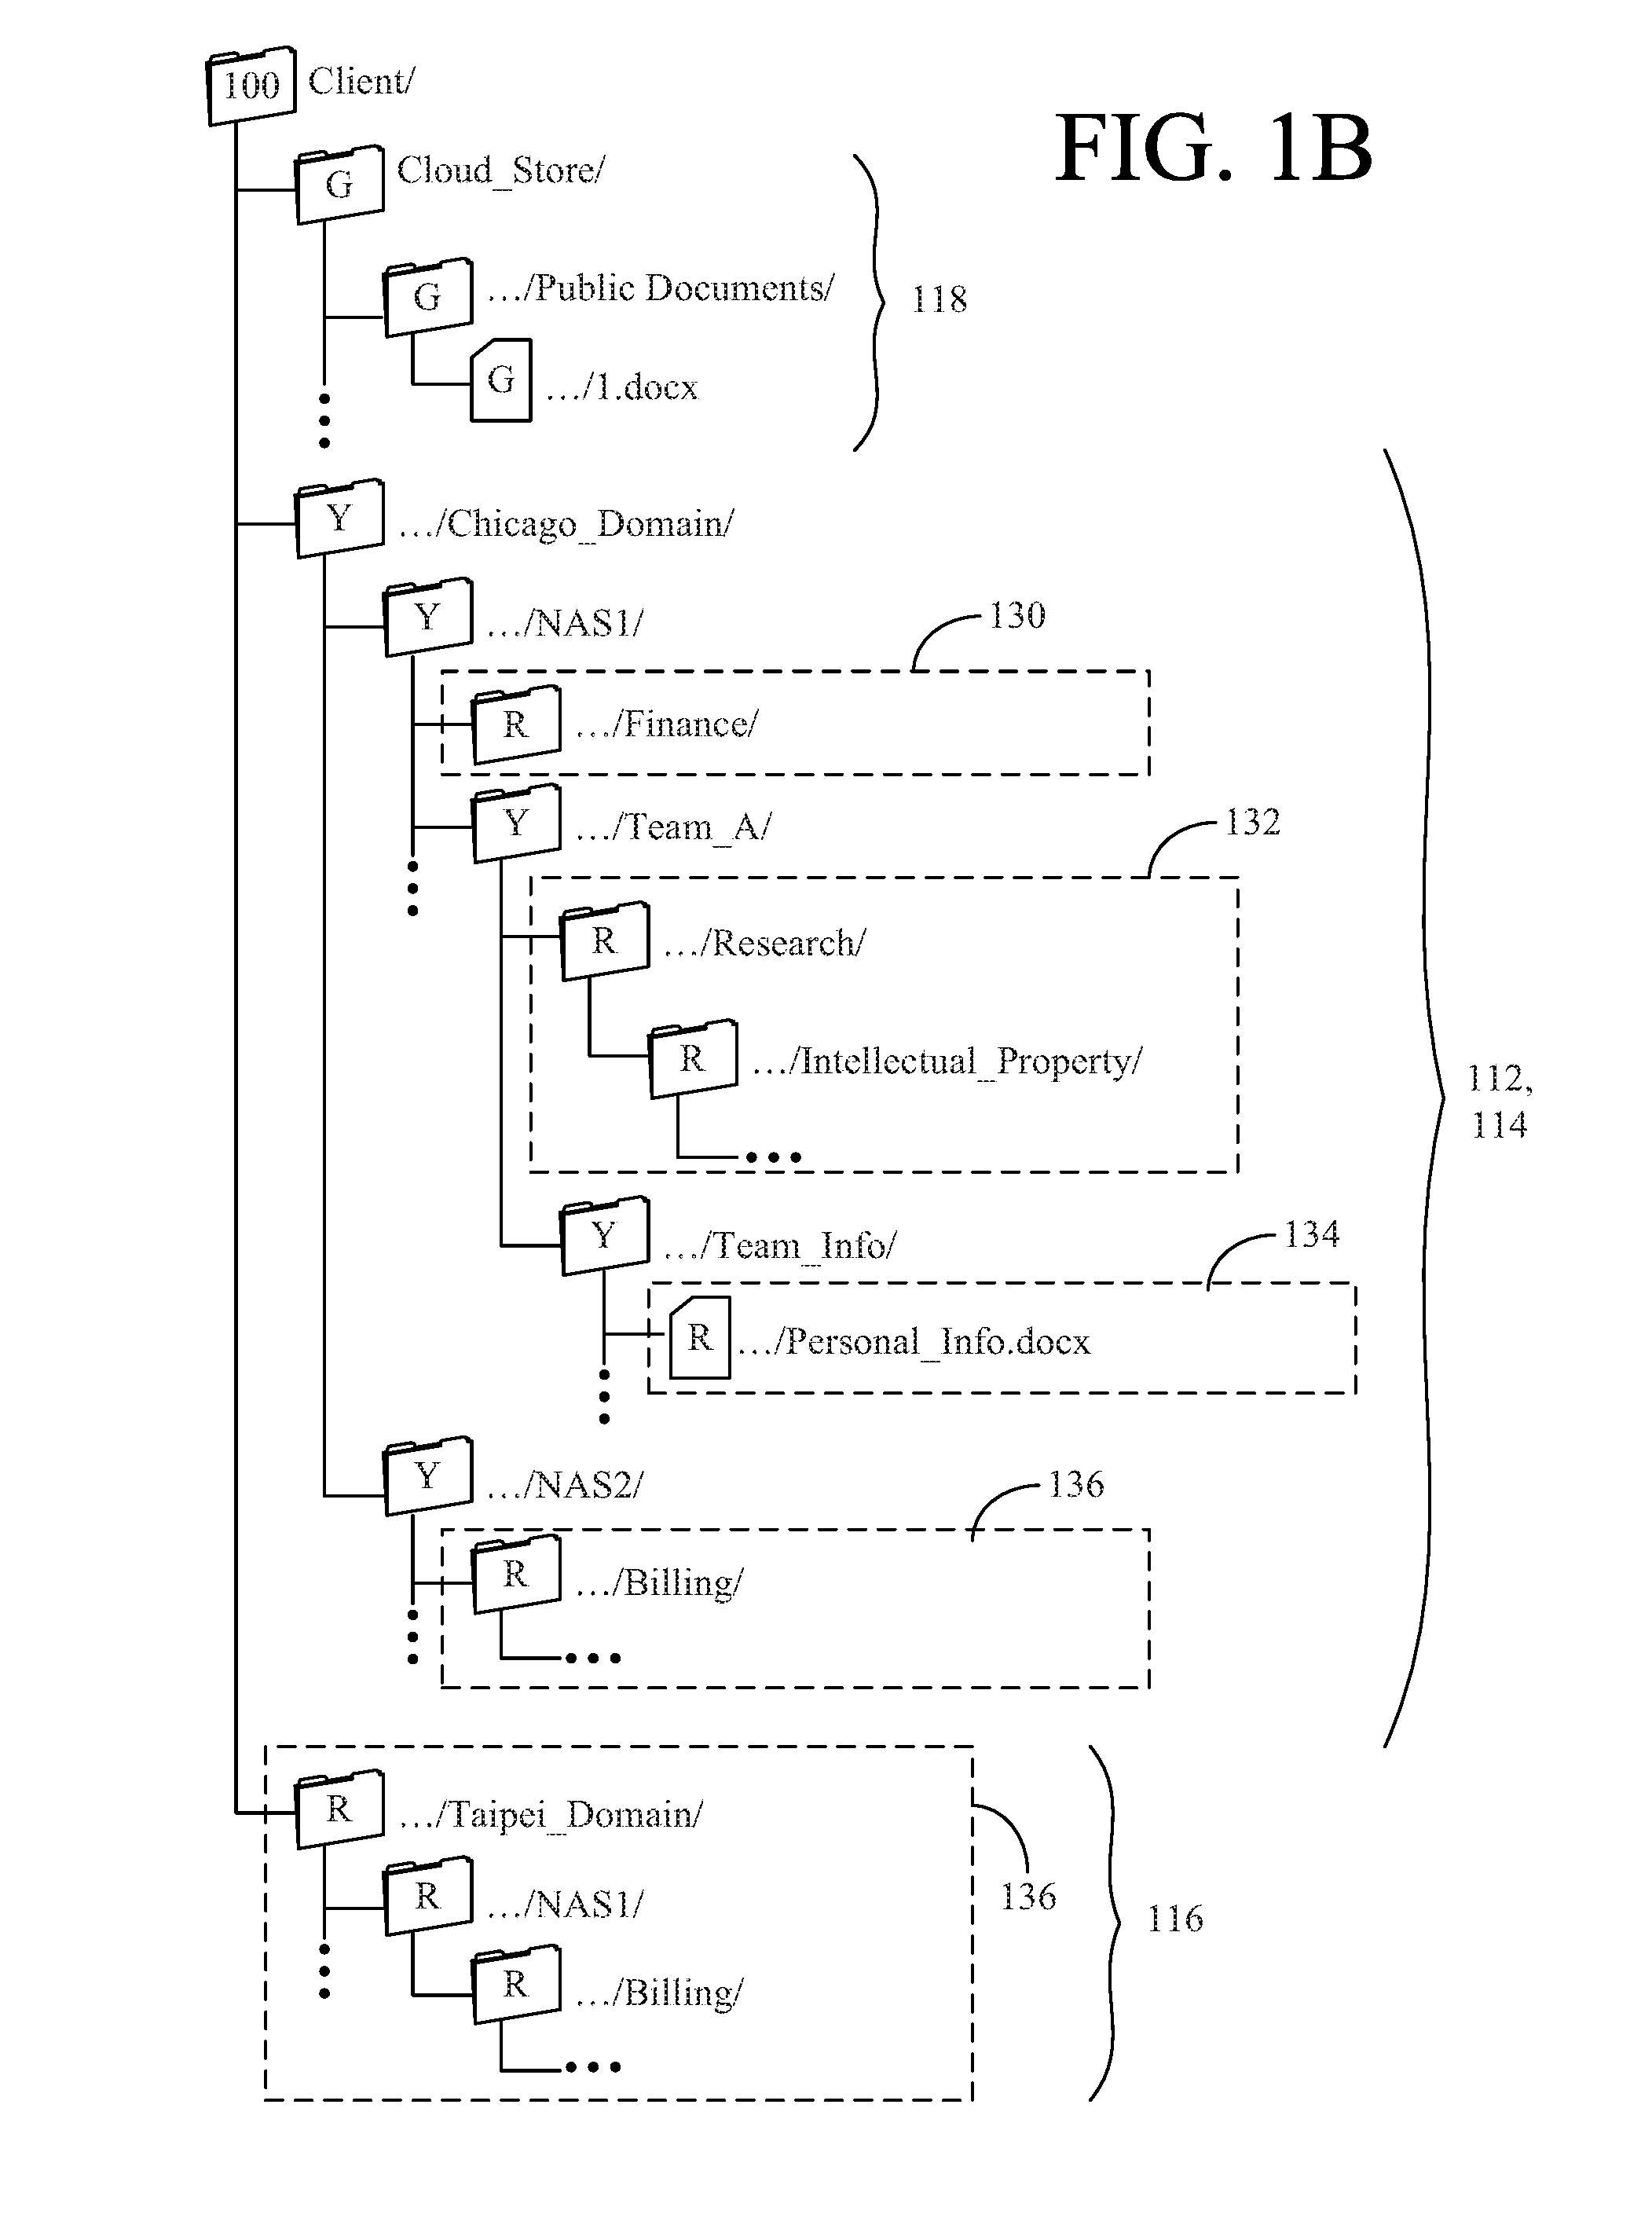 Systems and Methods for Facilitating Access to Private Files Using a Cloud Storage System